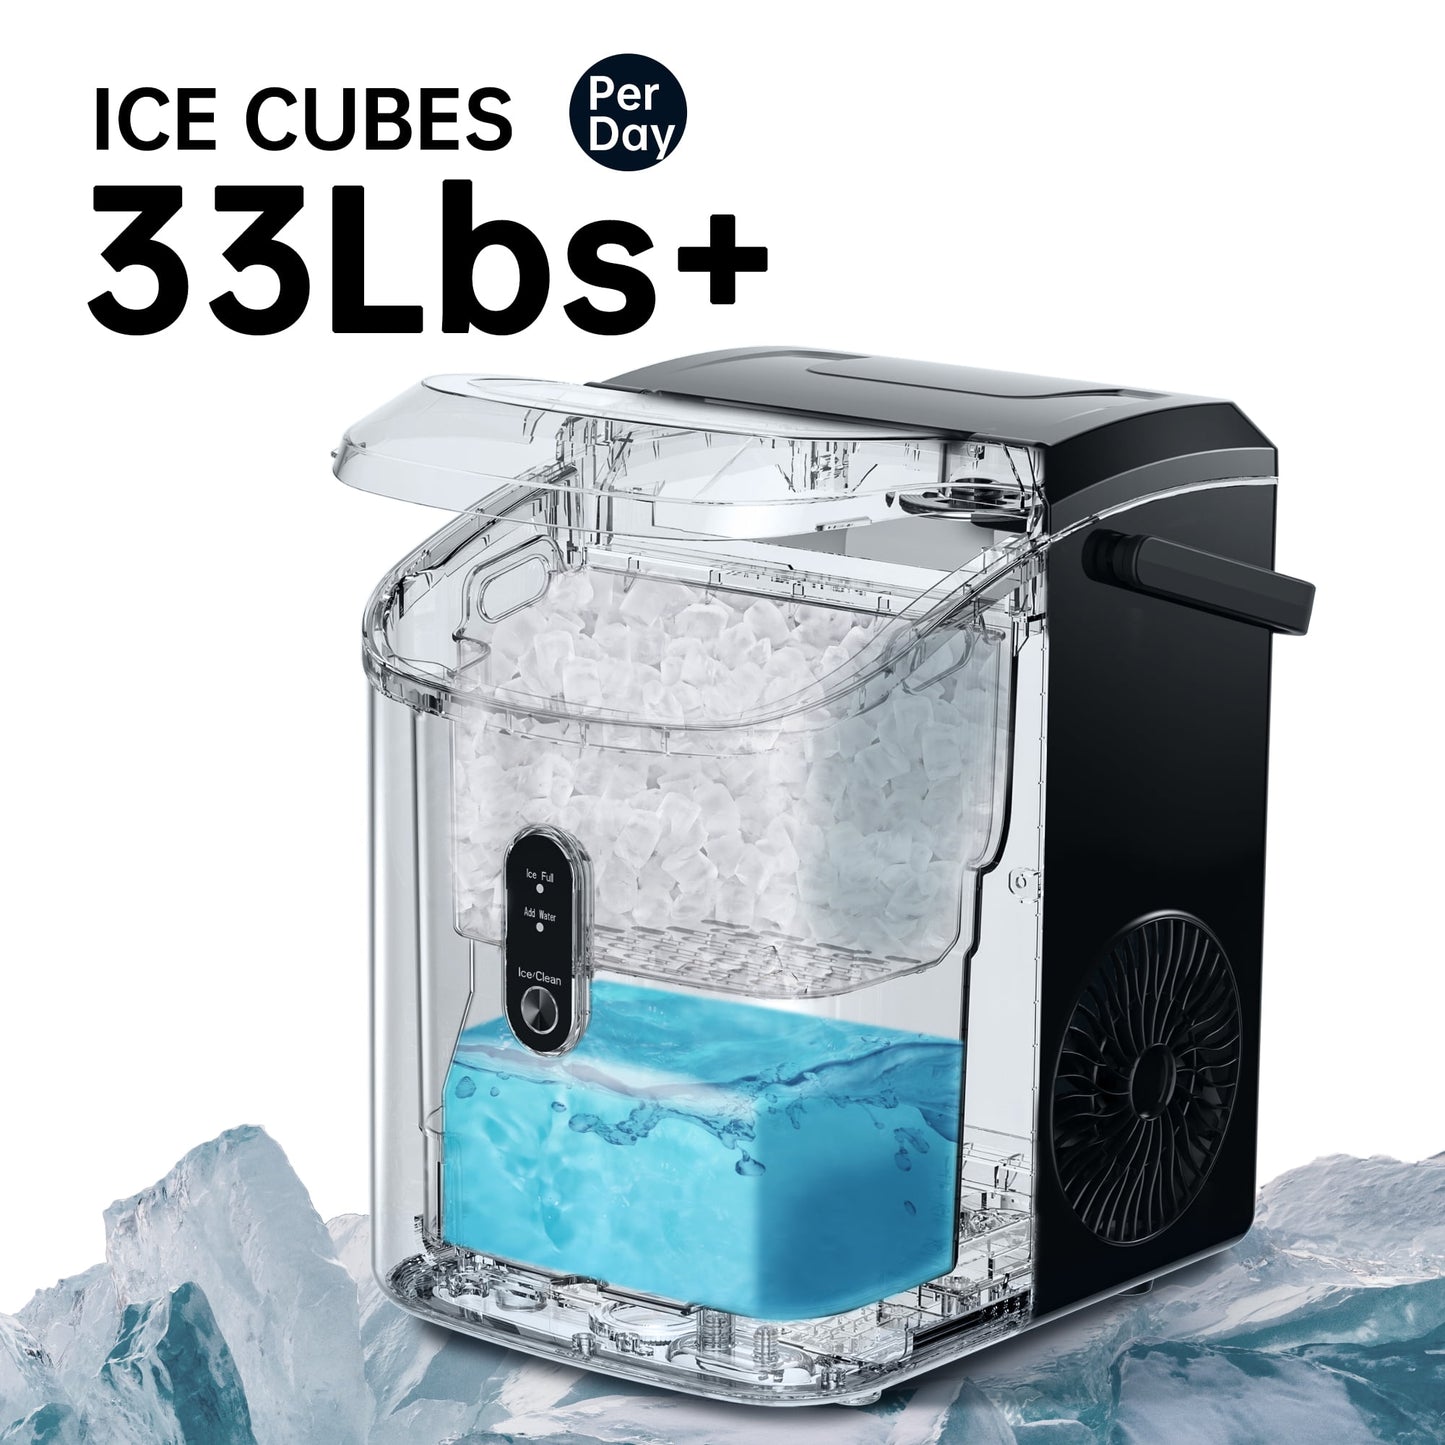 Simzlife Nugget Countertop Ice Maker with Soft Chewable Pellet Ice, Portable Ice Machine with Handle, Ready in 6 Mins, 33lbs Per Day, Self-Cleaning, for Home, Kitchen, Office, Black